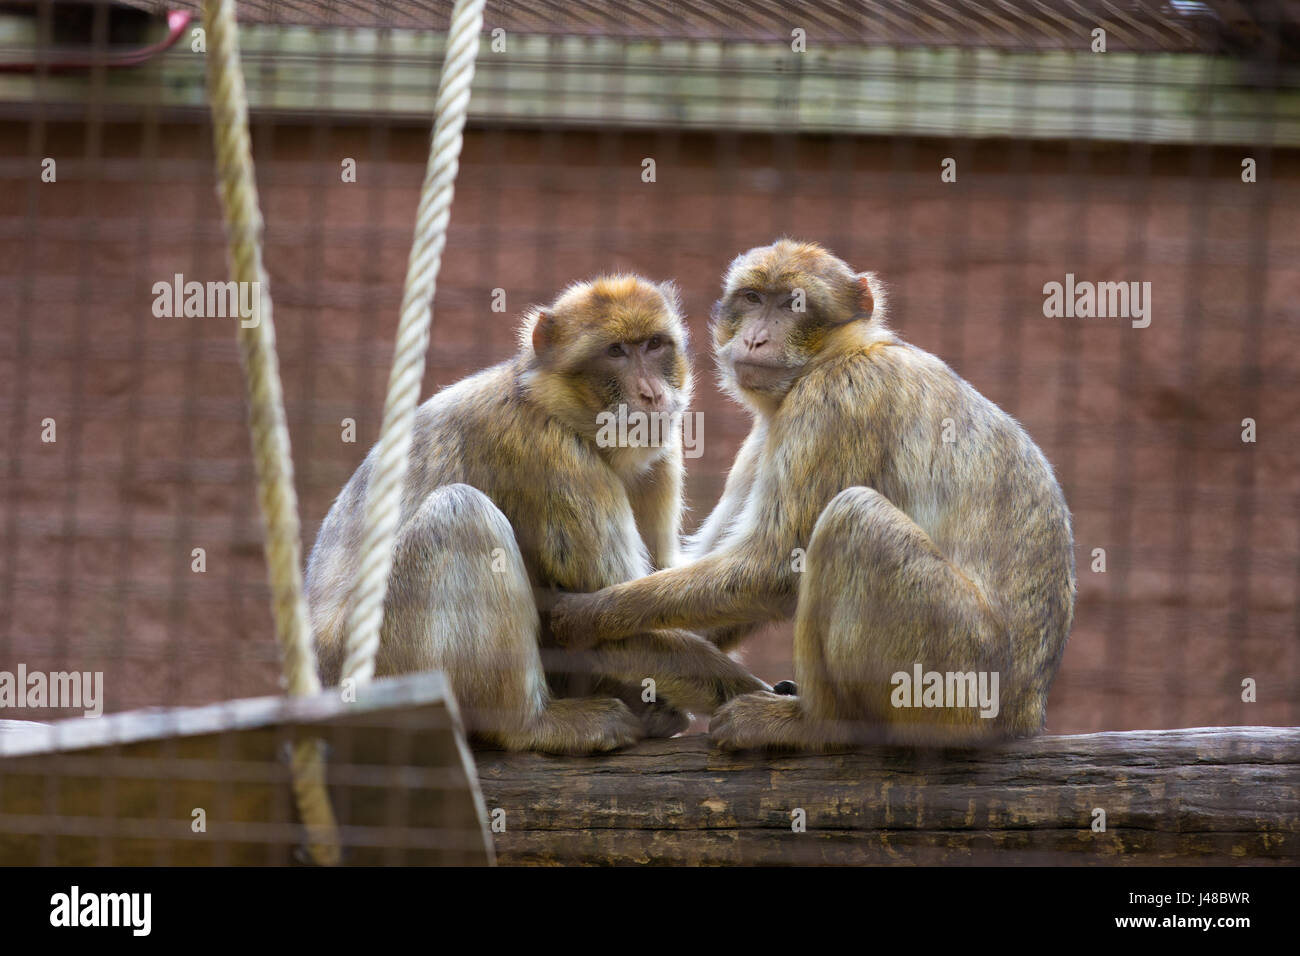 Two sad looking Barbary Apes (Macaca Sylvanus) in a cage in the zoo Stock Photo